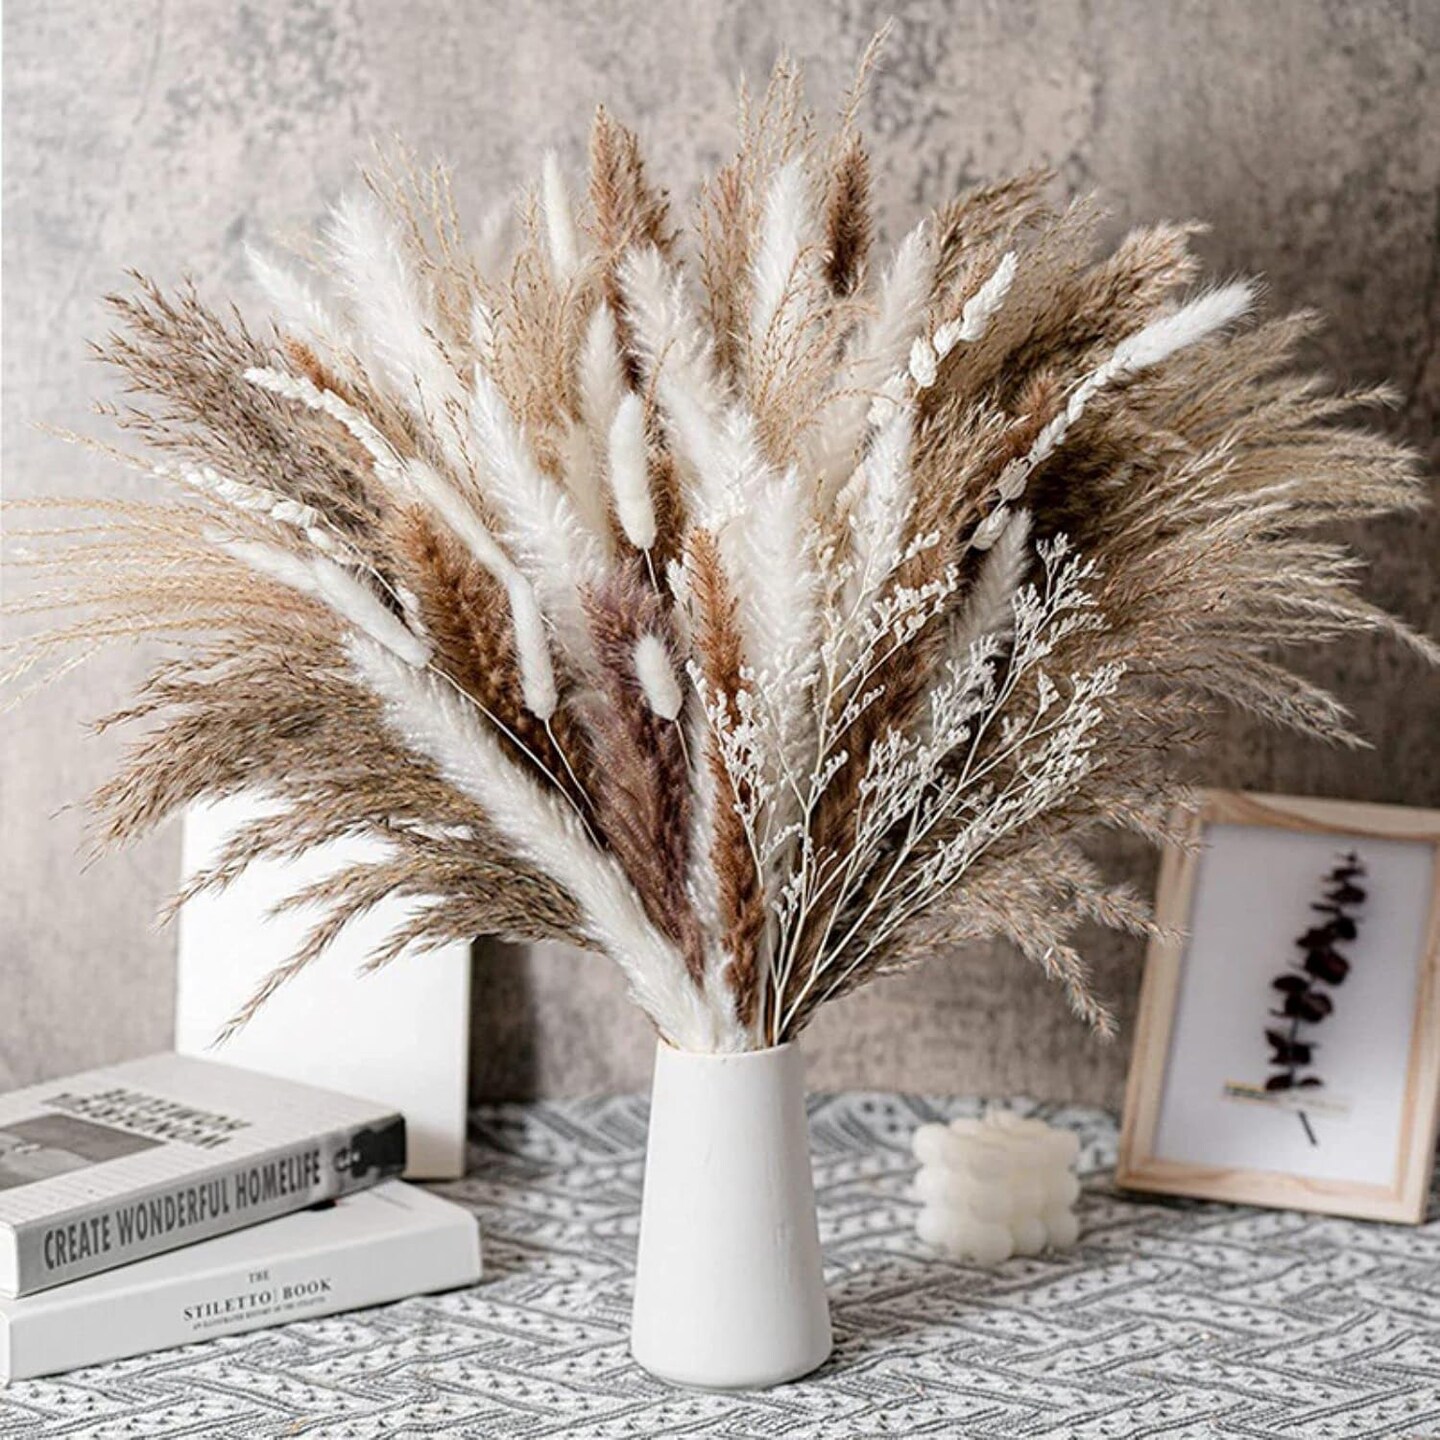 Natural Dried Pampas Grass Boho Home Decor Dried Flowers Bouquet Floral Home Decorations Reed Grass